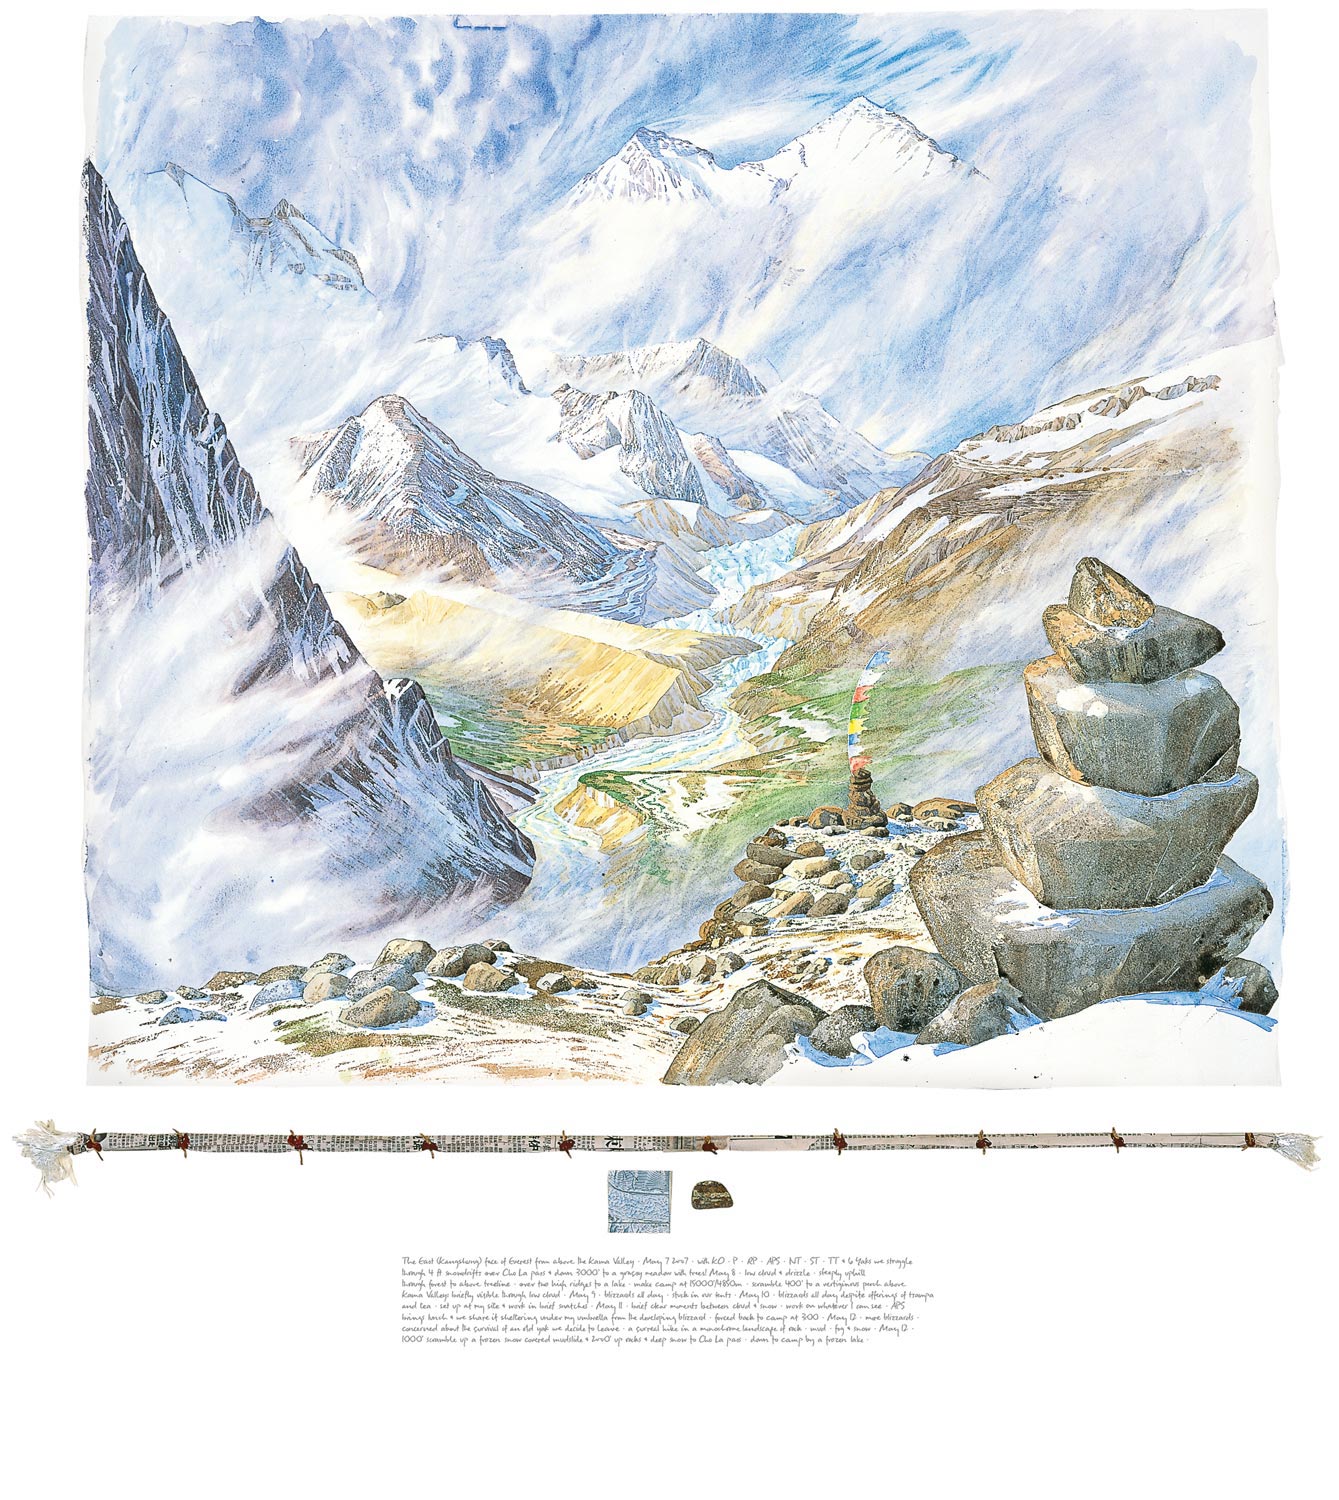   Tony Foster ,  The East (Kangshung) Face of Everest from above the Kama Valley , 2007 